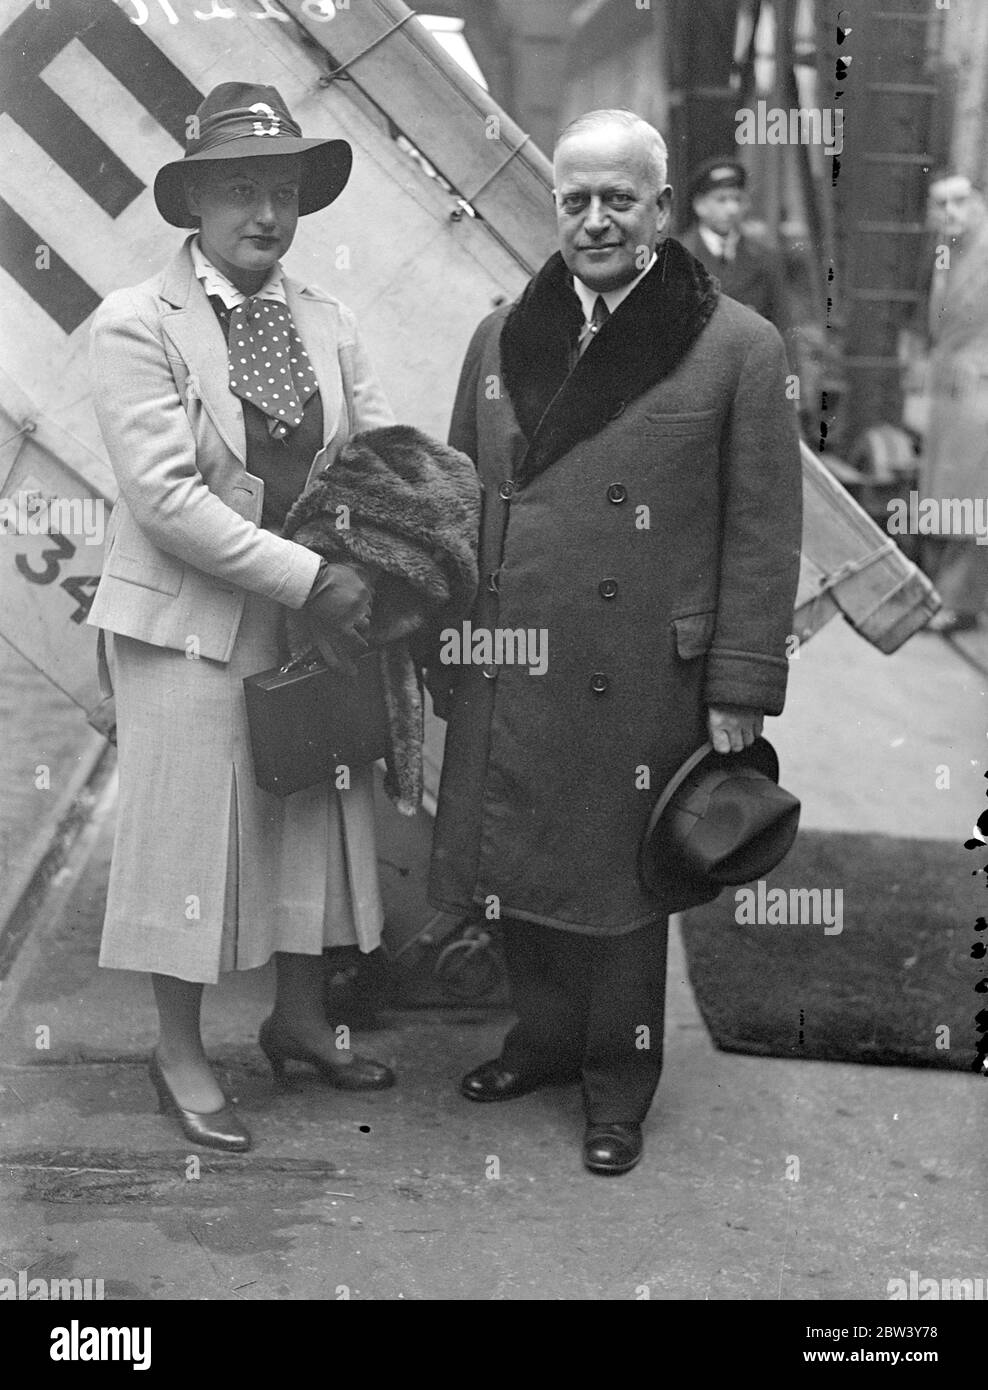 Danish Consul explorer arrives in England from Antarctic Survey . Travelling from the Antarctic , where he has been exploring and mapping new territory , lars Christensen , Danish Consul in Norway , arrived at Southampton with his daughter aboard the Warwick Castle . Consul Christensen is a well known Antarctic explorer . Photo shows , Consul Lars Christensen with his daughter on arrival at Southampton . 8 March 1937 Stock Photo